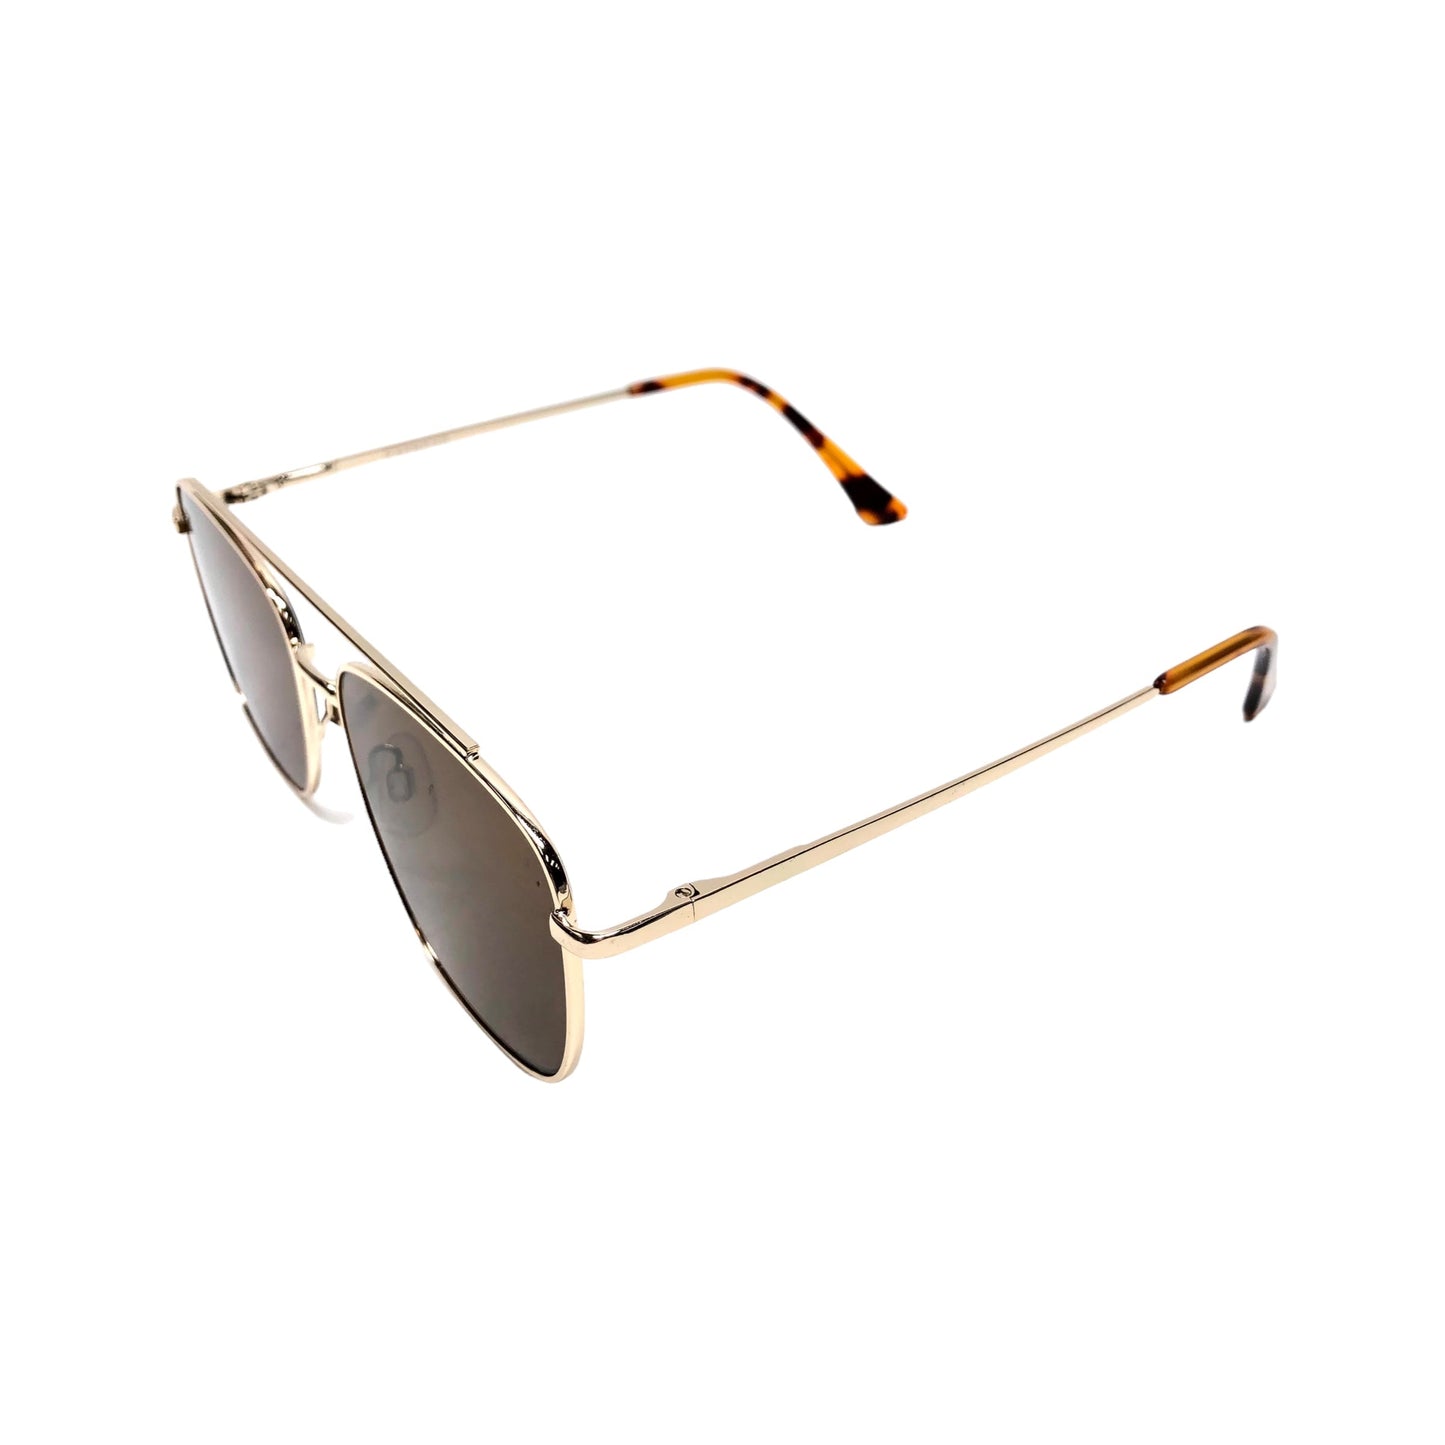 Sunglasses By Express